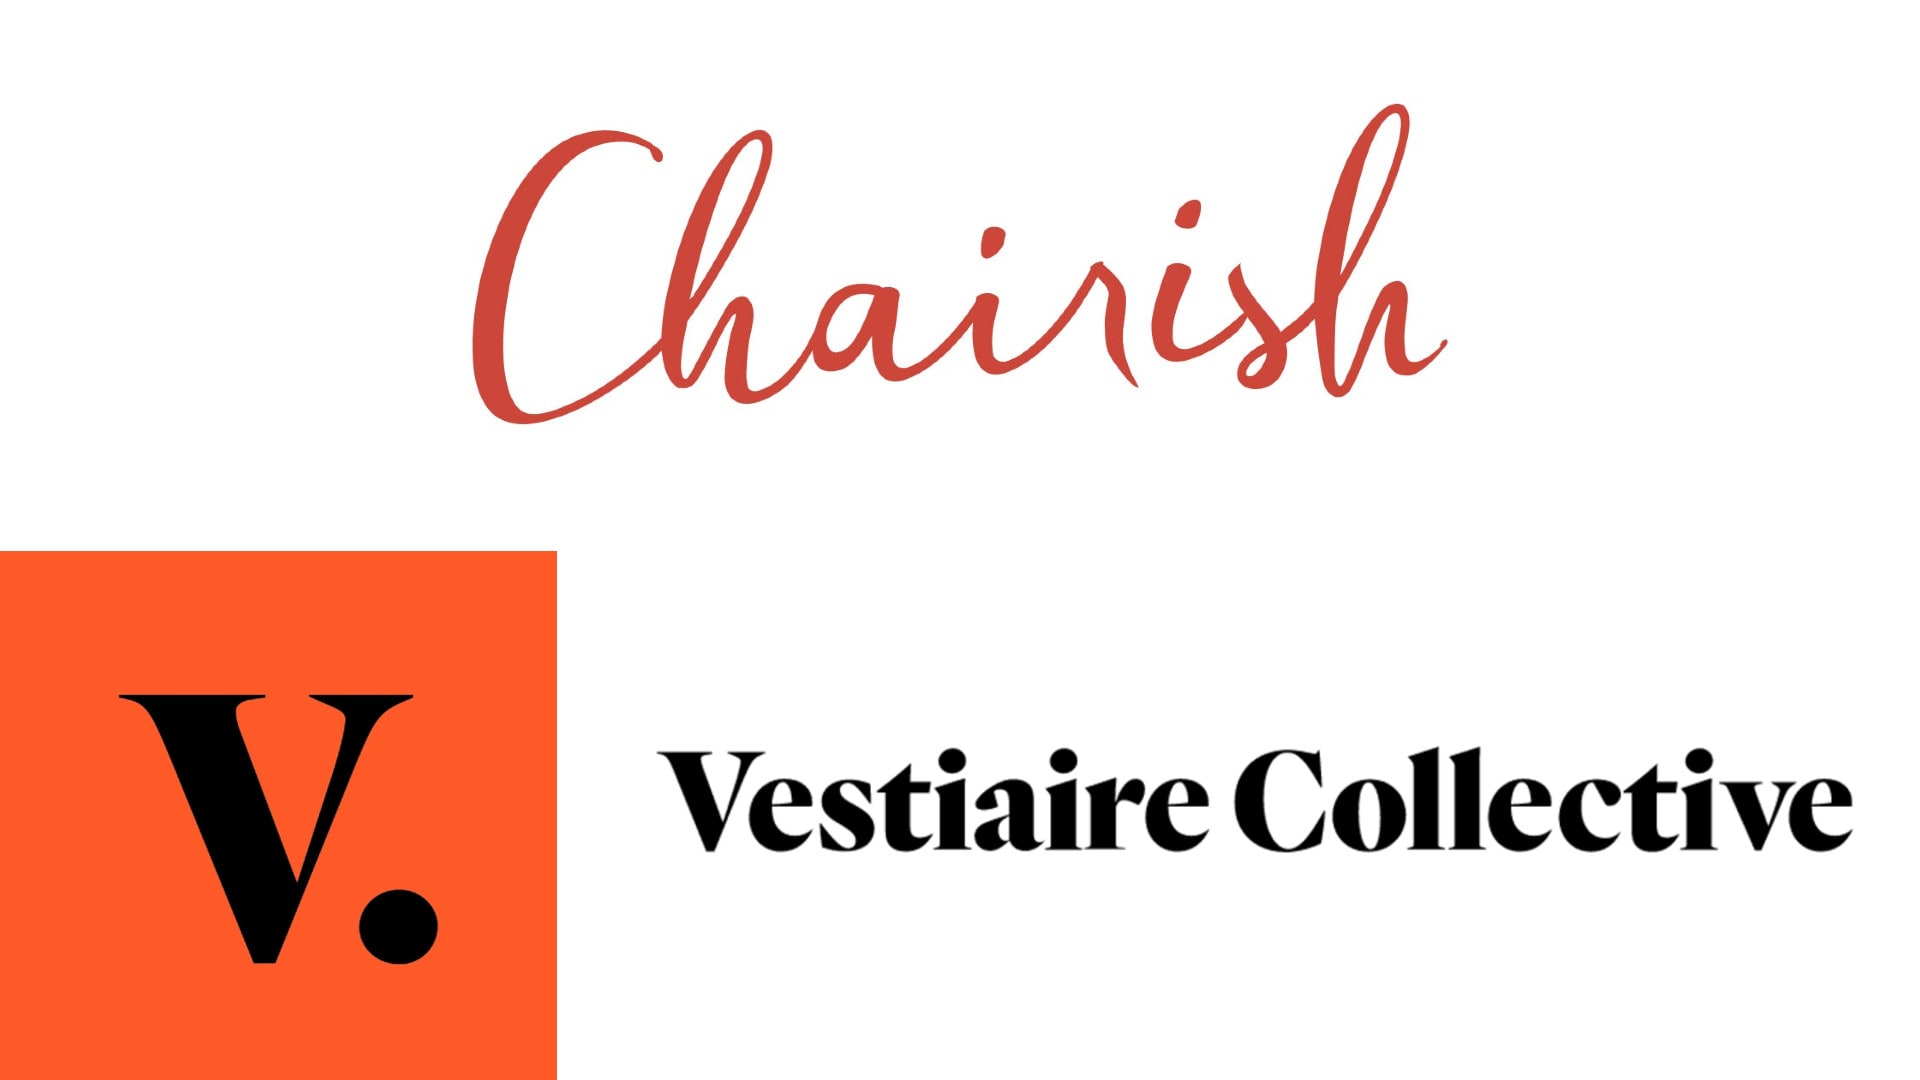 List products on chairish, vestiaire collective by Airbnbhost